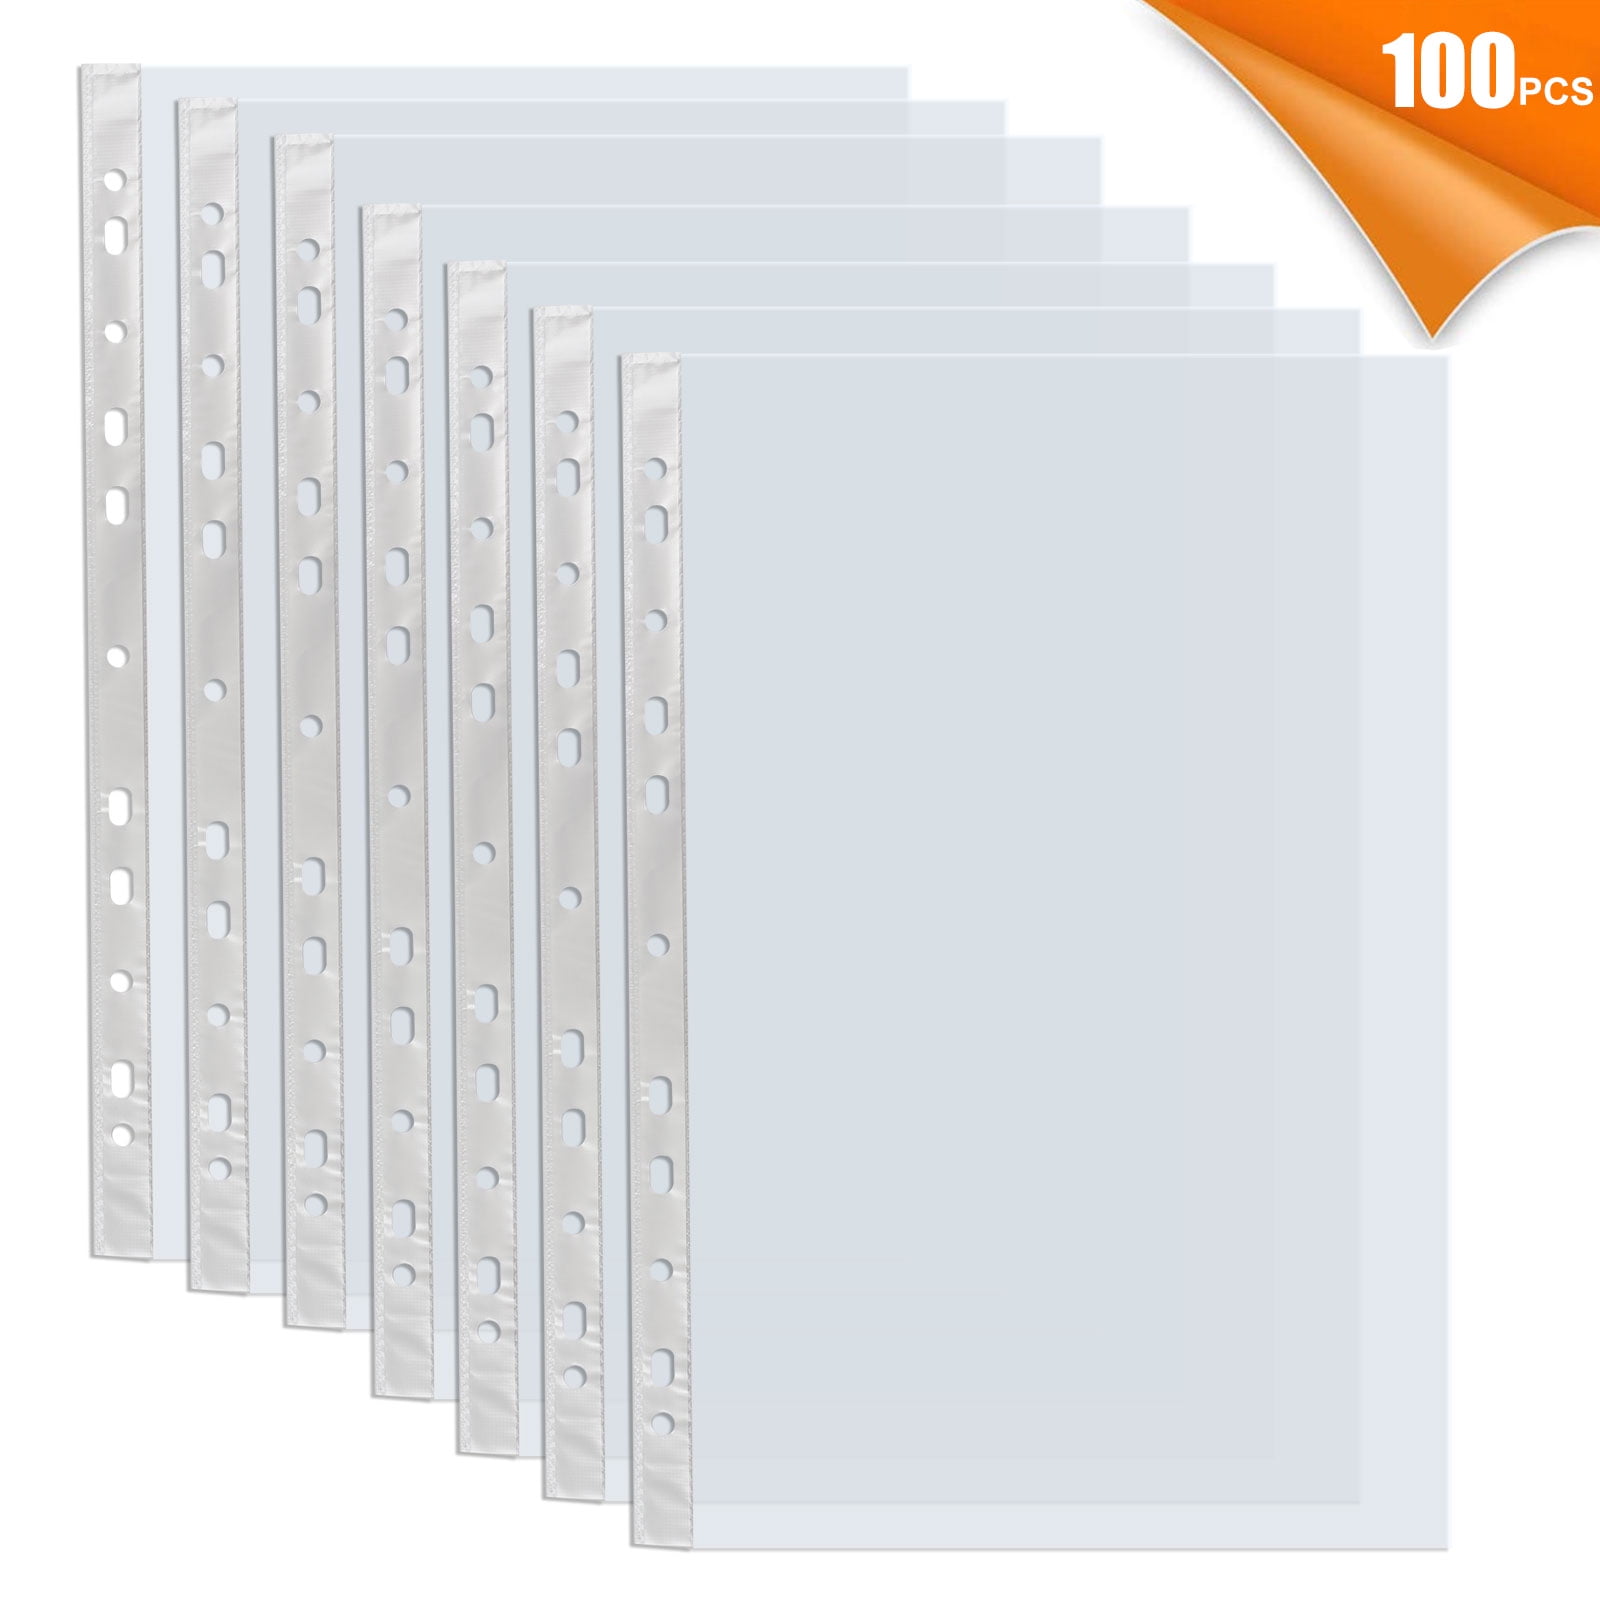 EEEkit 100Pcs Sheet Protector Fit for 8.2 x 12 in Letter Size, Top Loading  Page Protectors Sleeves for 3 Ring Binder